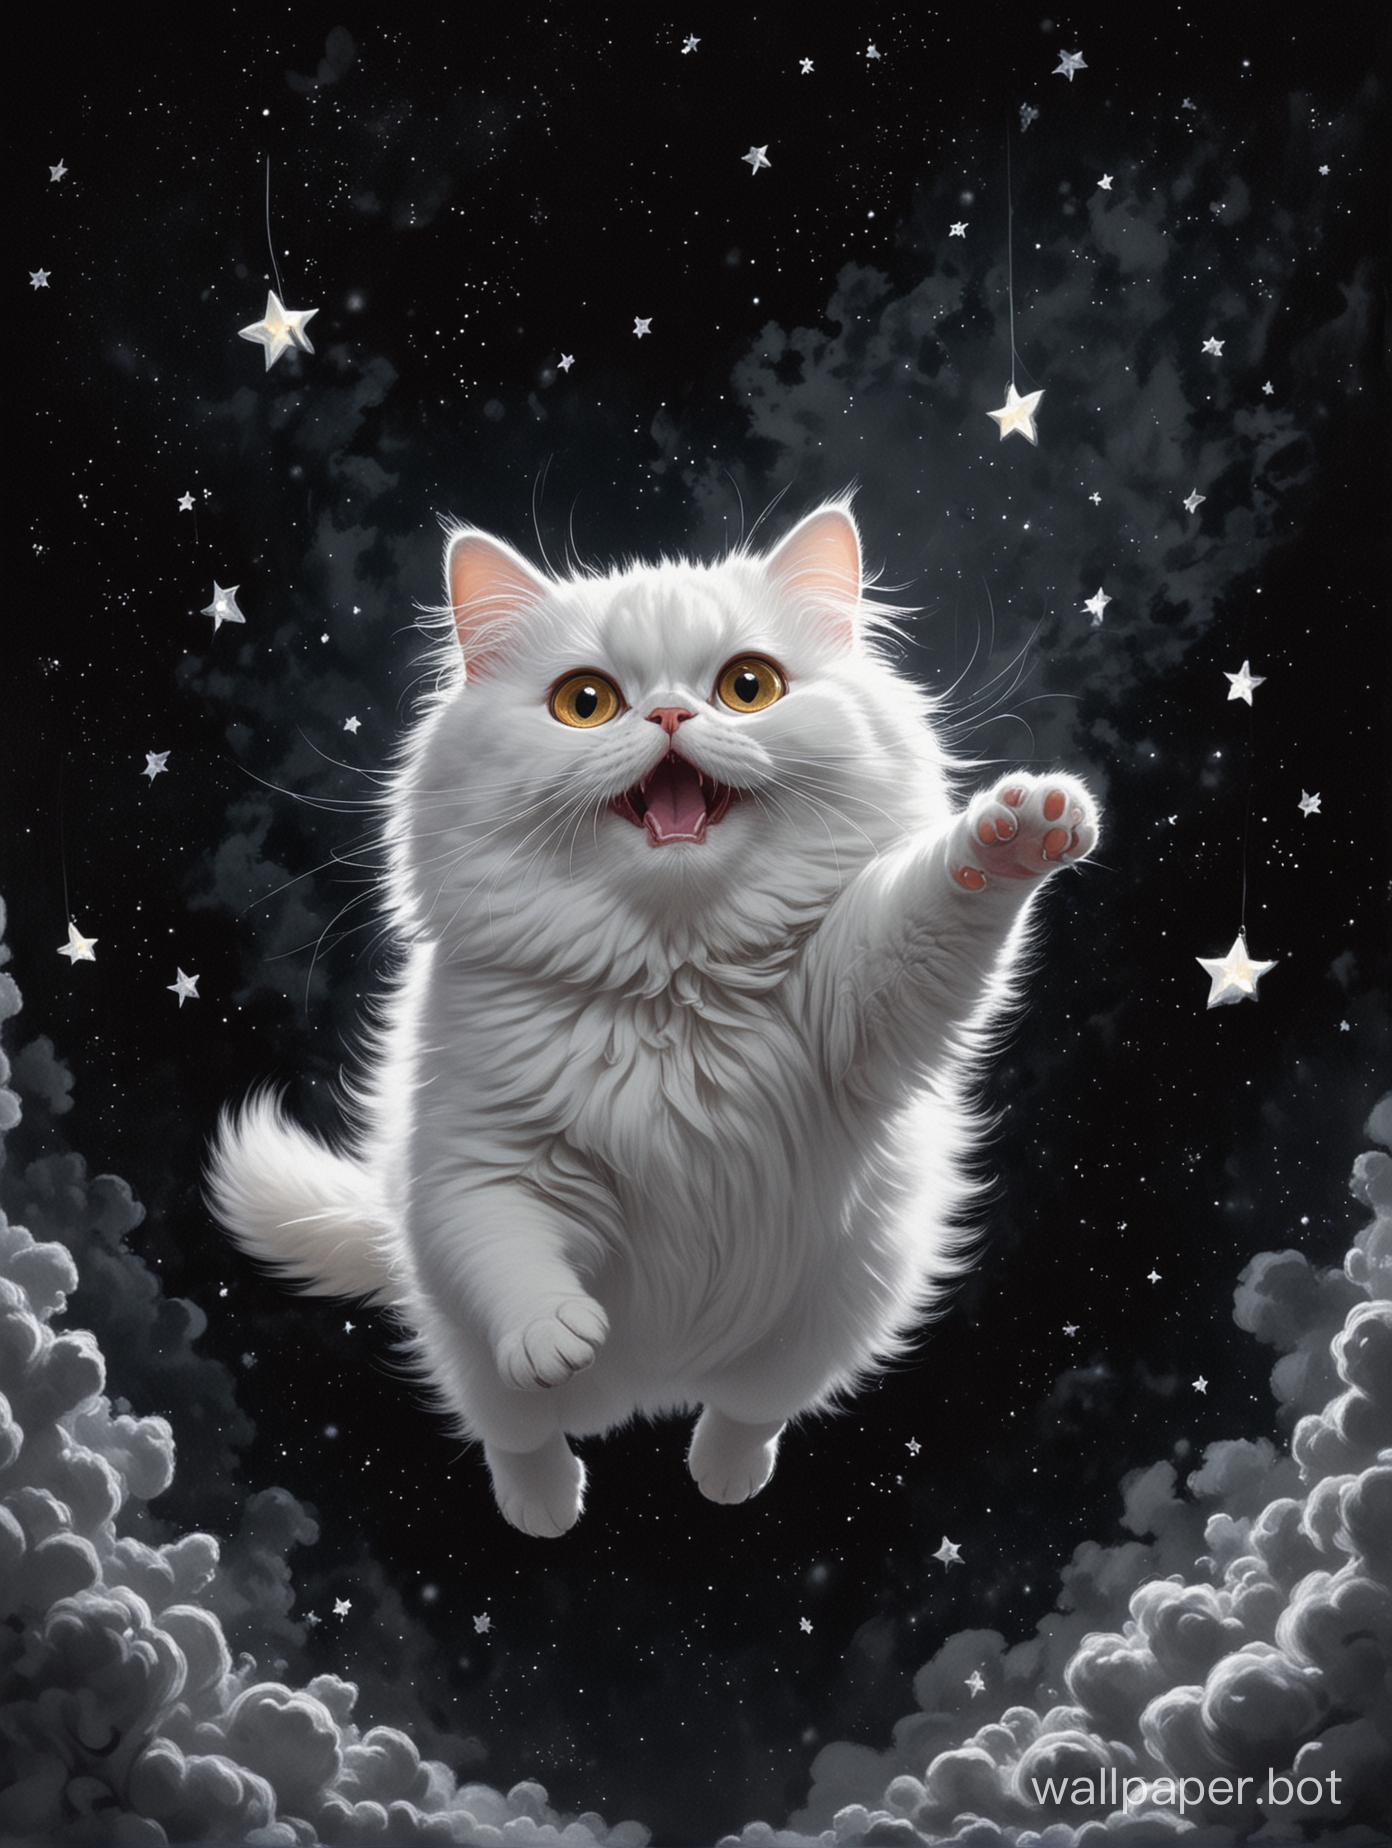 Fluffy fat white cat with big eyes and fluffy tale jumping in pitch black space with smal stars